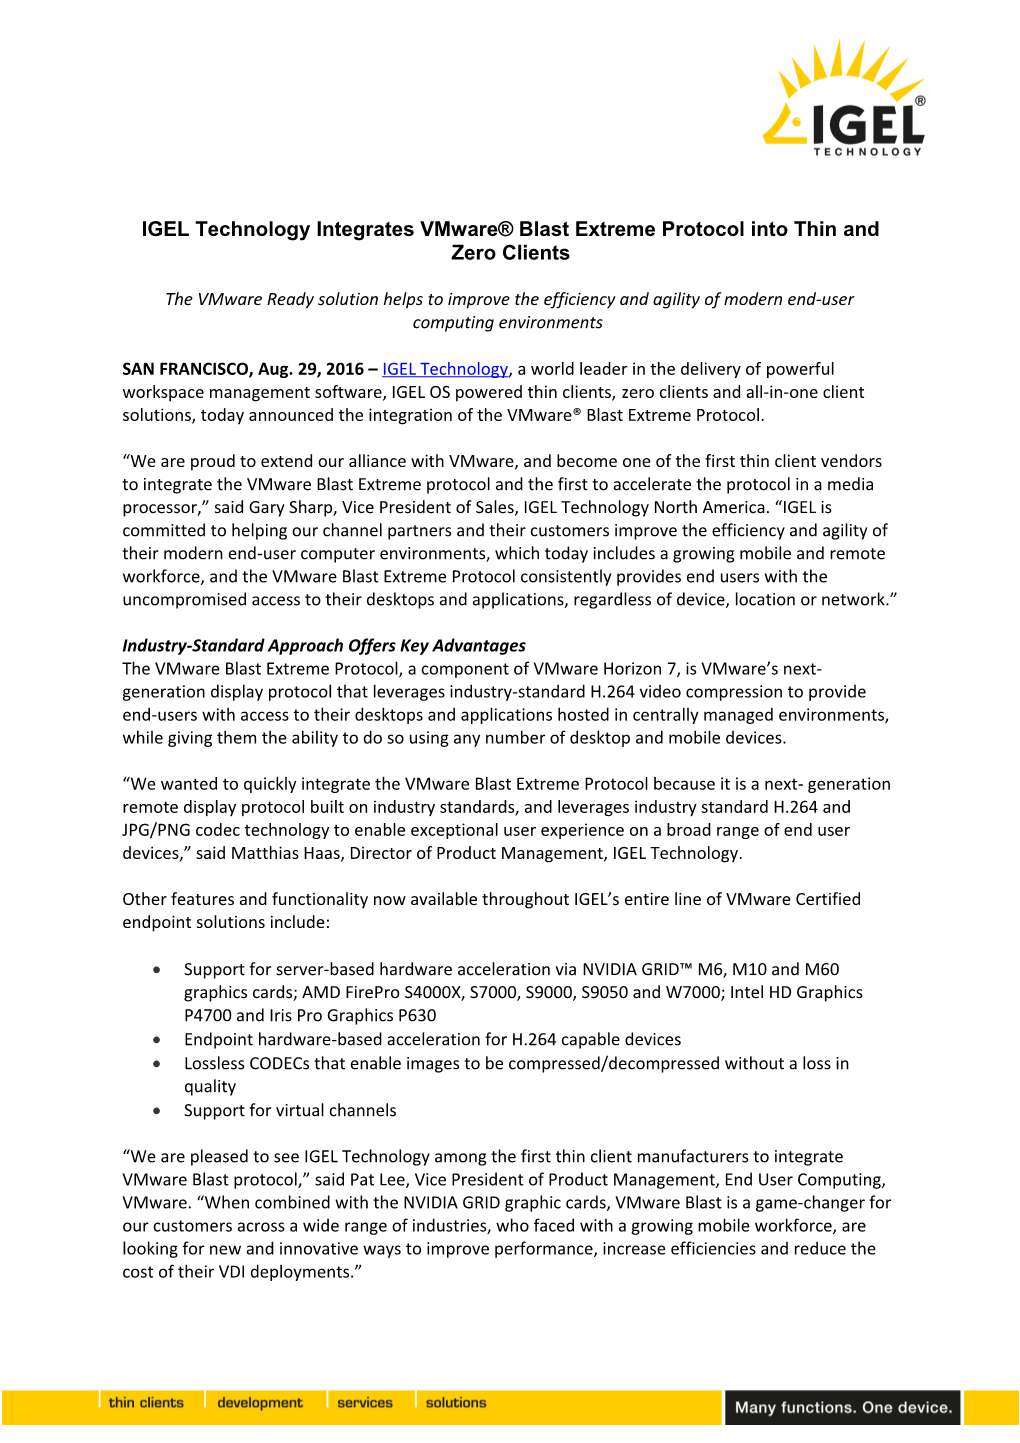 IGEL Technology Integrates Vmware Blast Extreme Protocol Into Thin and Zero Clients